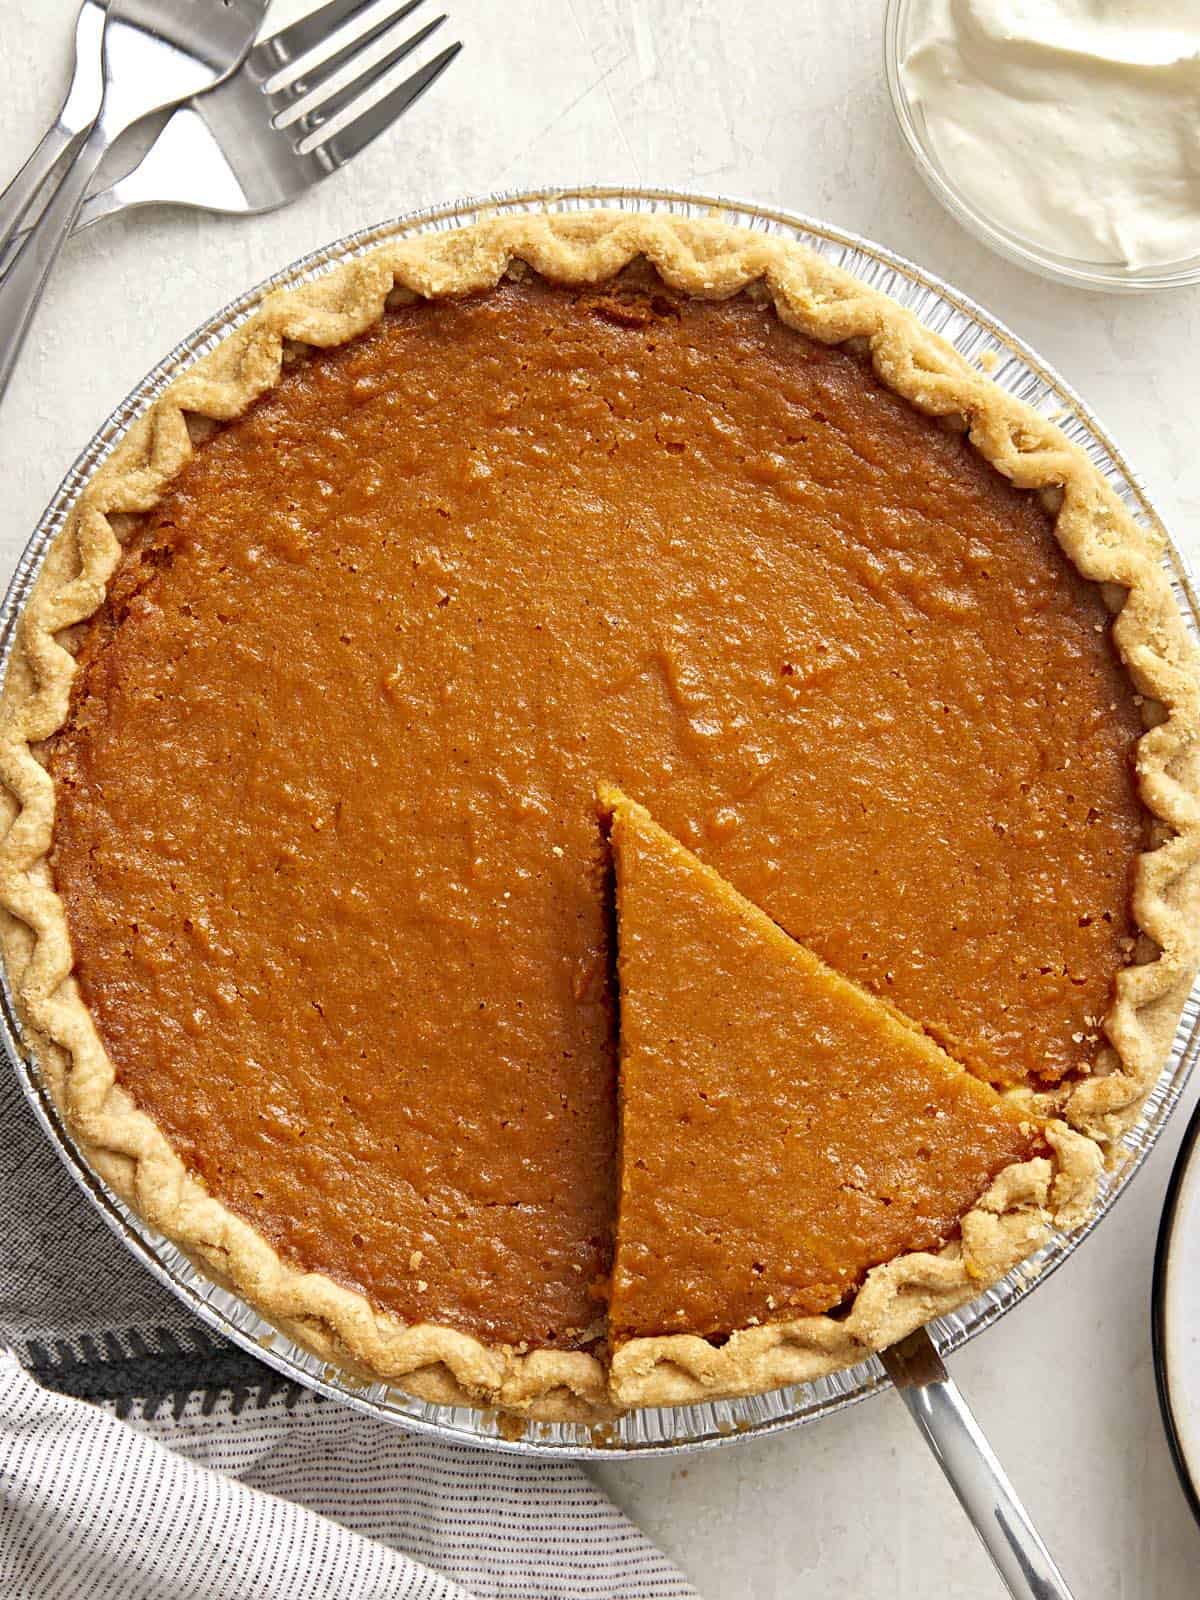 Overhead view of a whole sweet potato pie with one slice cut and being lifted out of the pie pan.